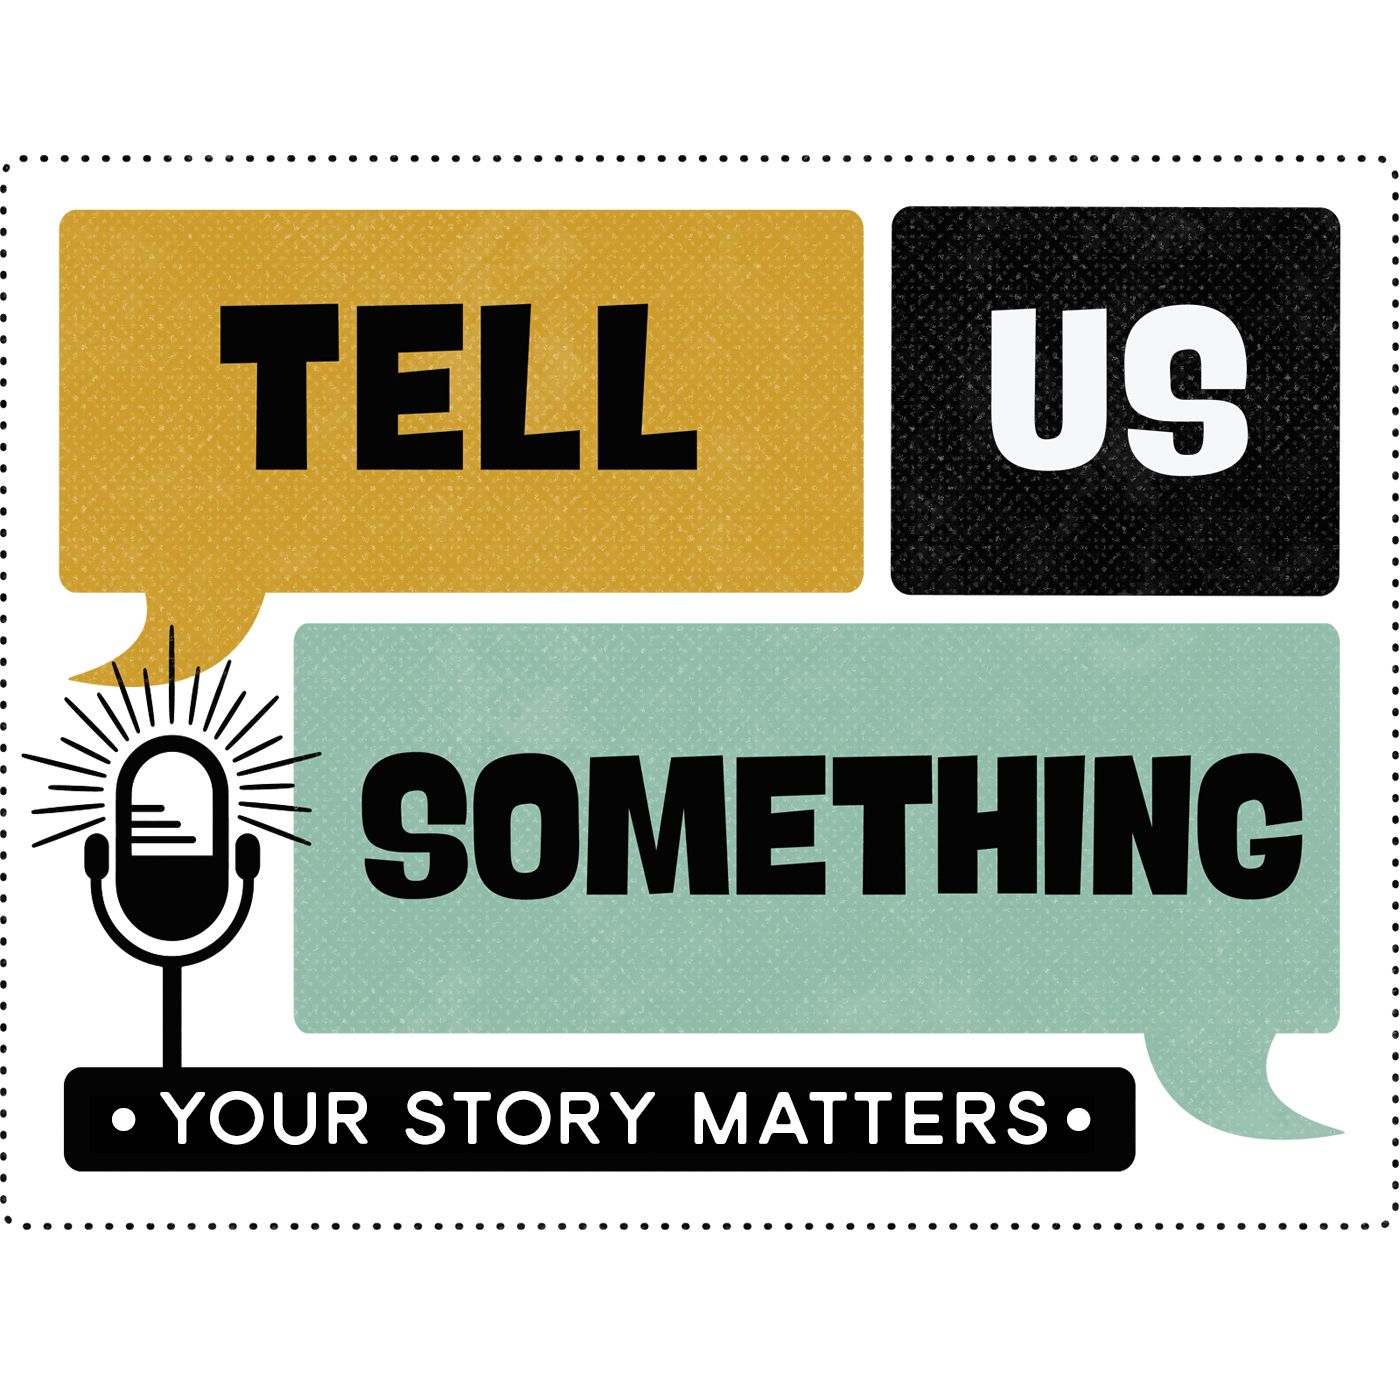 Tell Us Something A Celebration of Storytelling, Community and Each Other pic